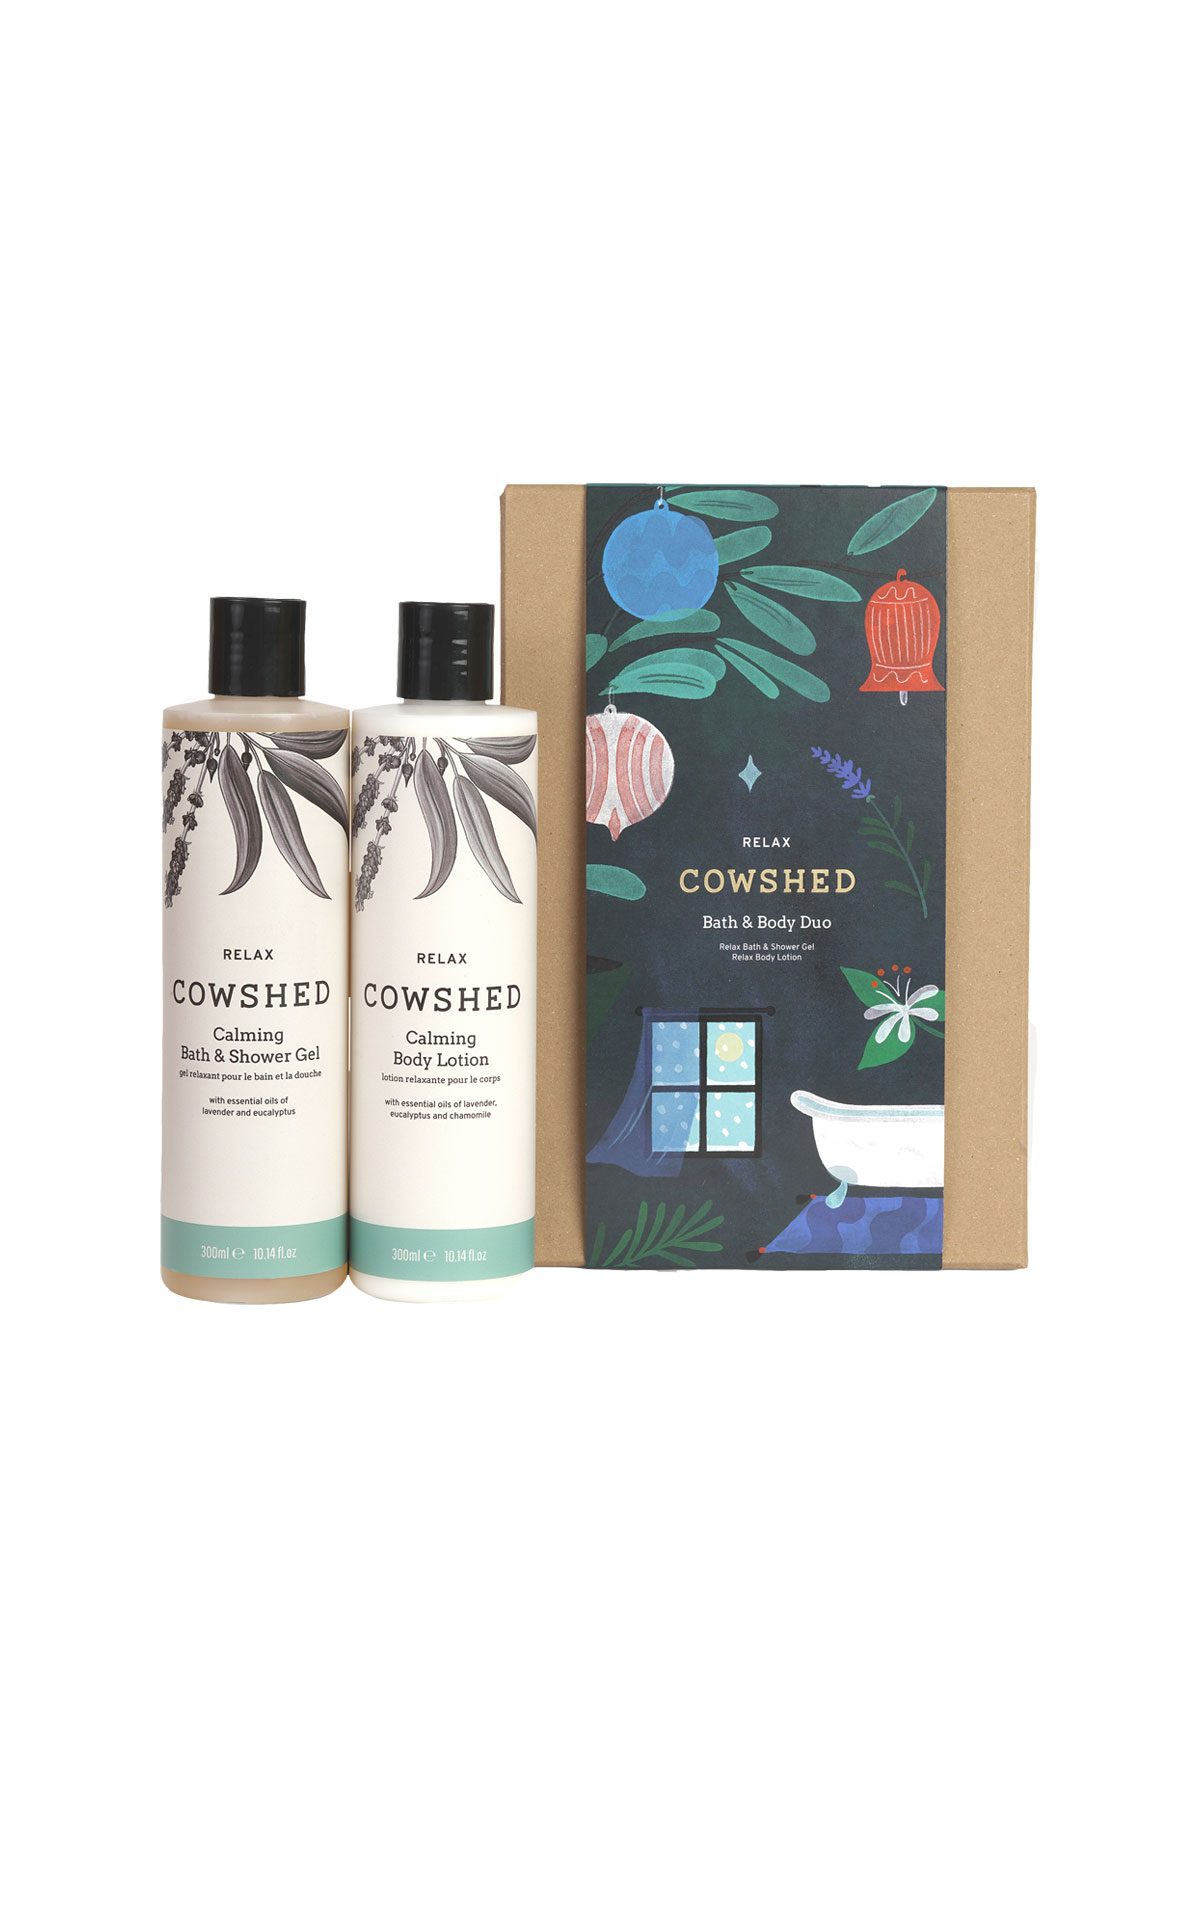 Soho Home COWSHED relax bath & body duo from Bicester Village